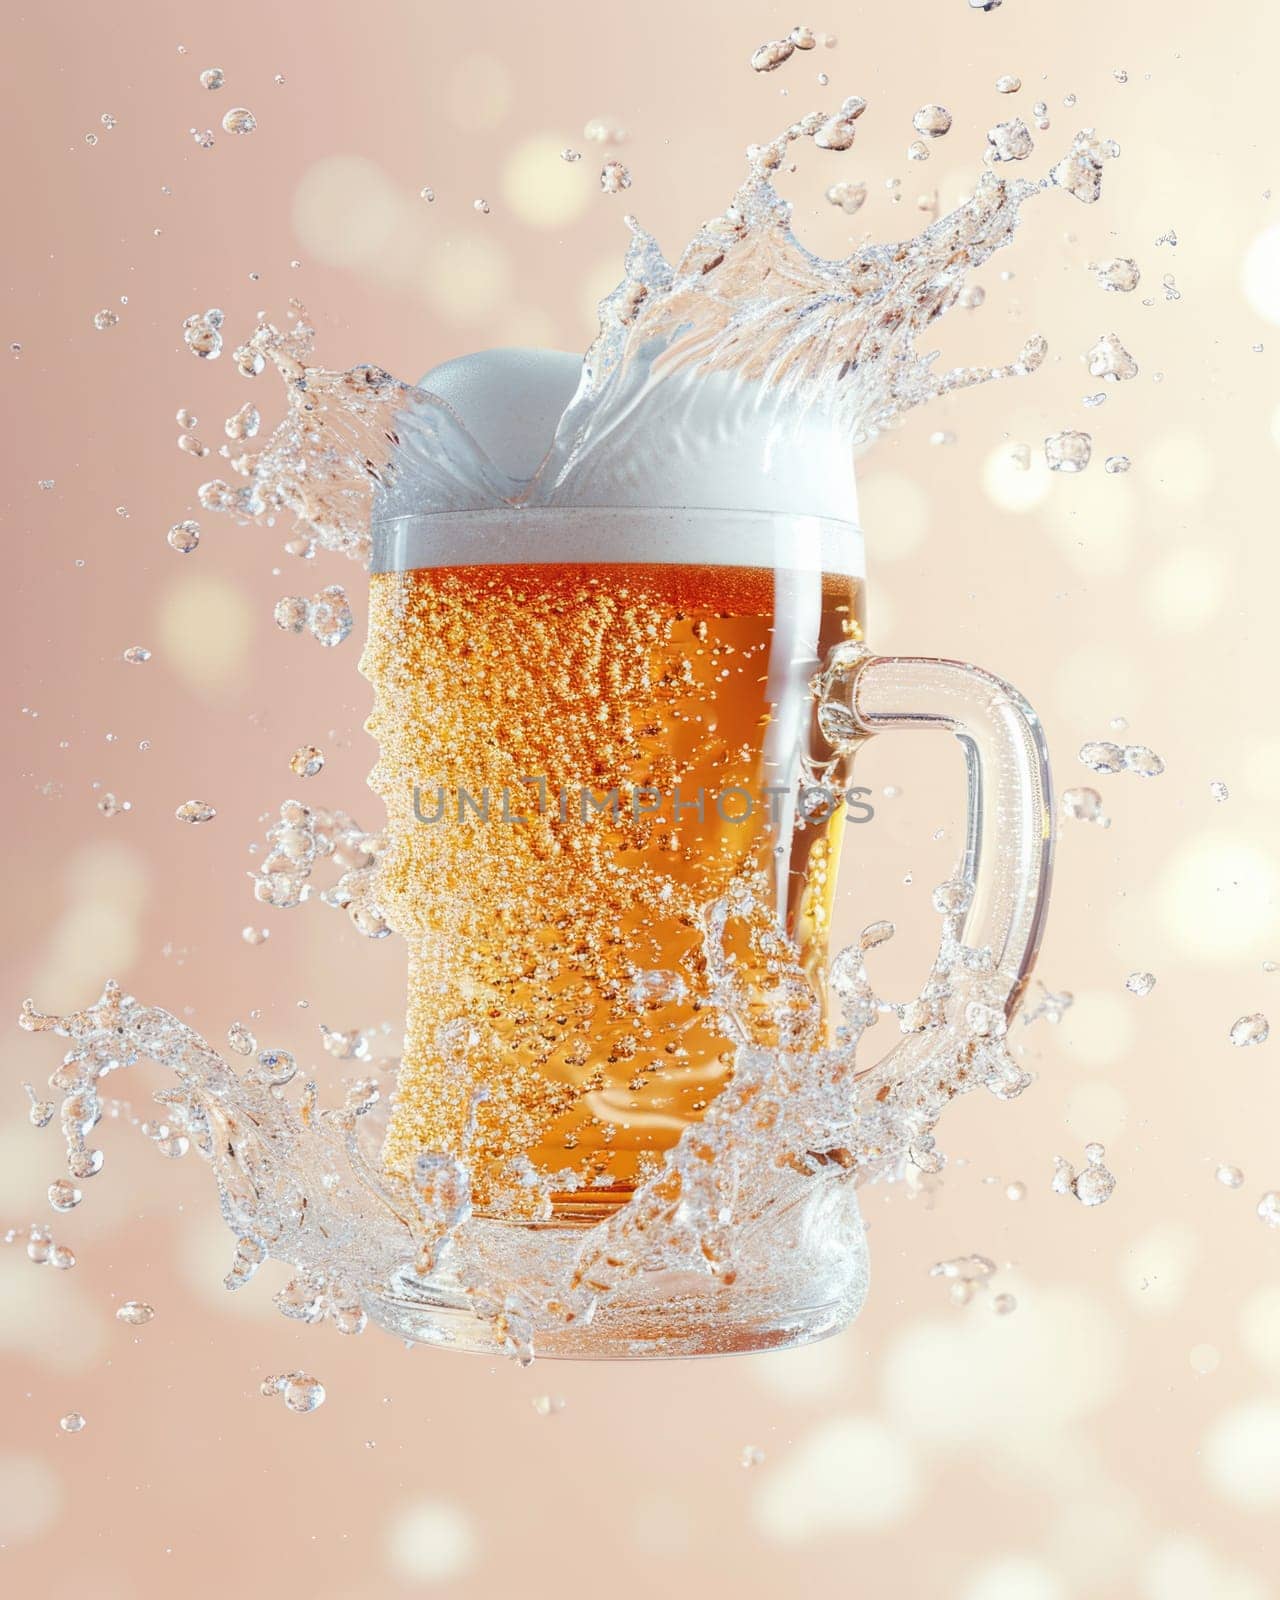 A mug of beer in a whirlwind of bright splashes on a light background by Yurich32